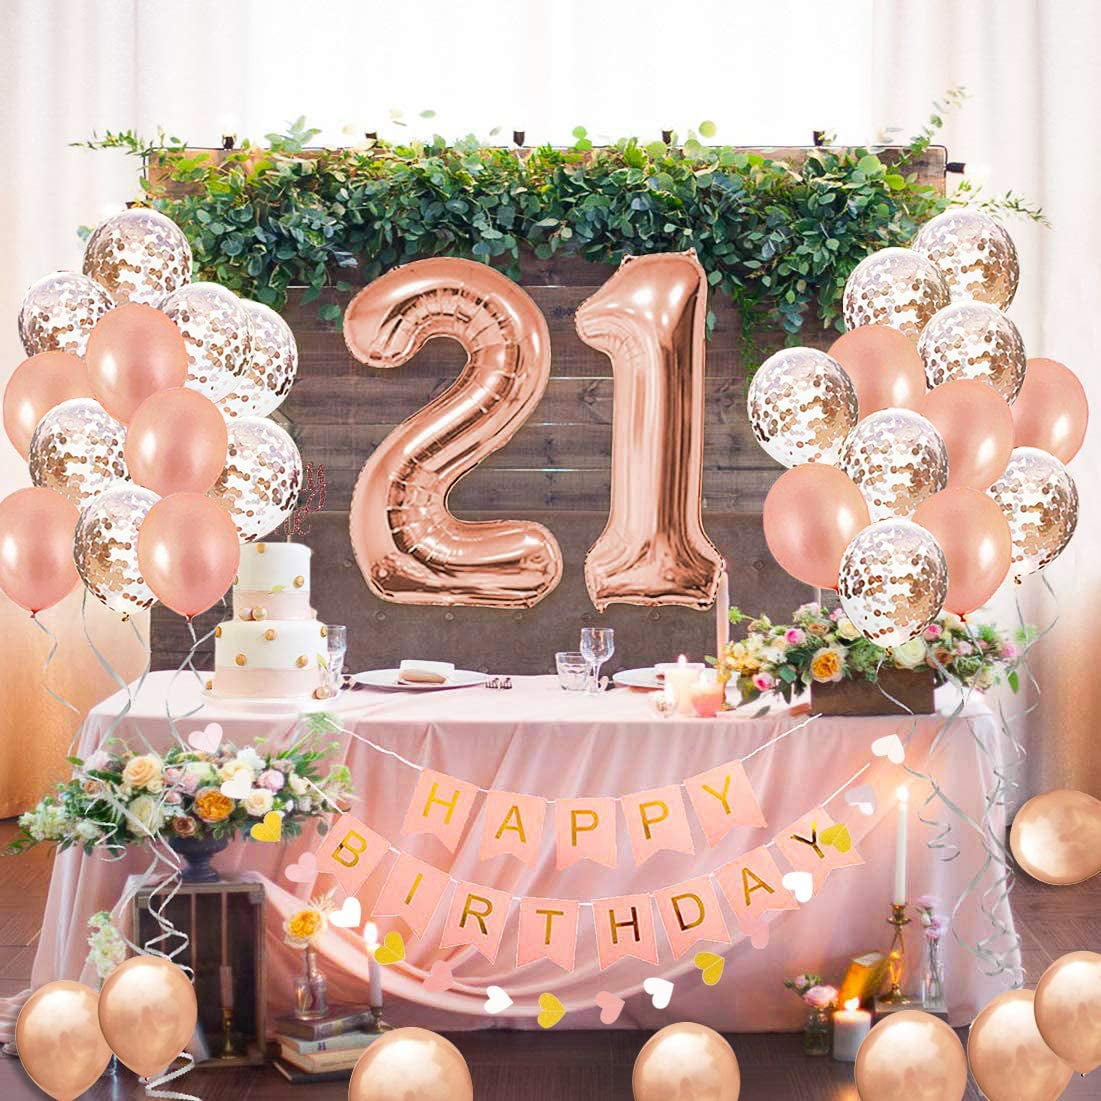 21st Birthday Decorations Party Supplies Kit for Her - Finally 21 Birthday Sash, Happy Birthday Banner, Number 21 Birthday Balloons, Rose Gold Curtain,Confetti Balloons,Latex Balloons - Walmart.com